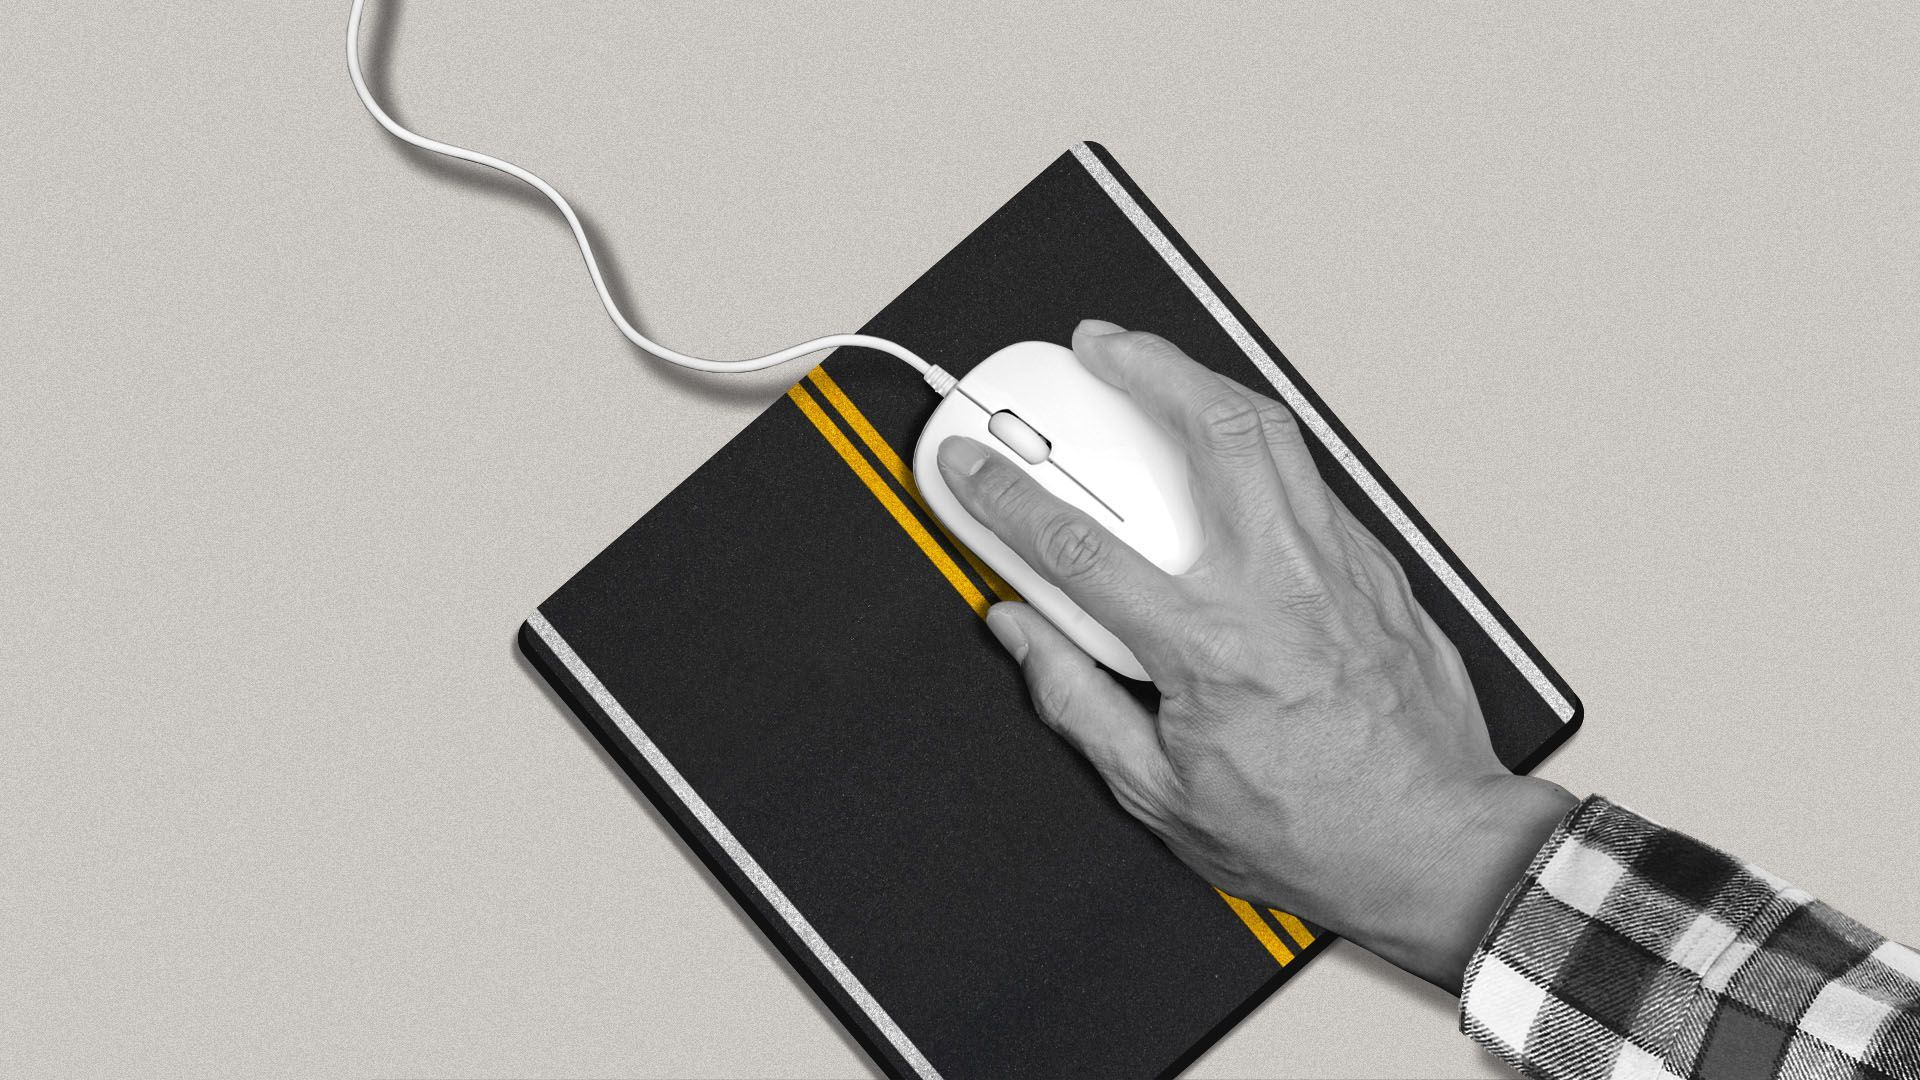 Illustration of a hand guiding a computer mouse on a highway-themed mouse pad.